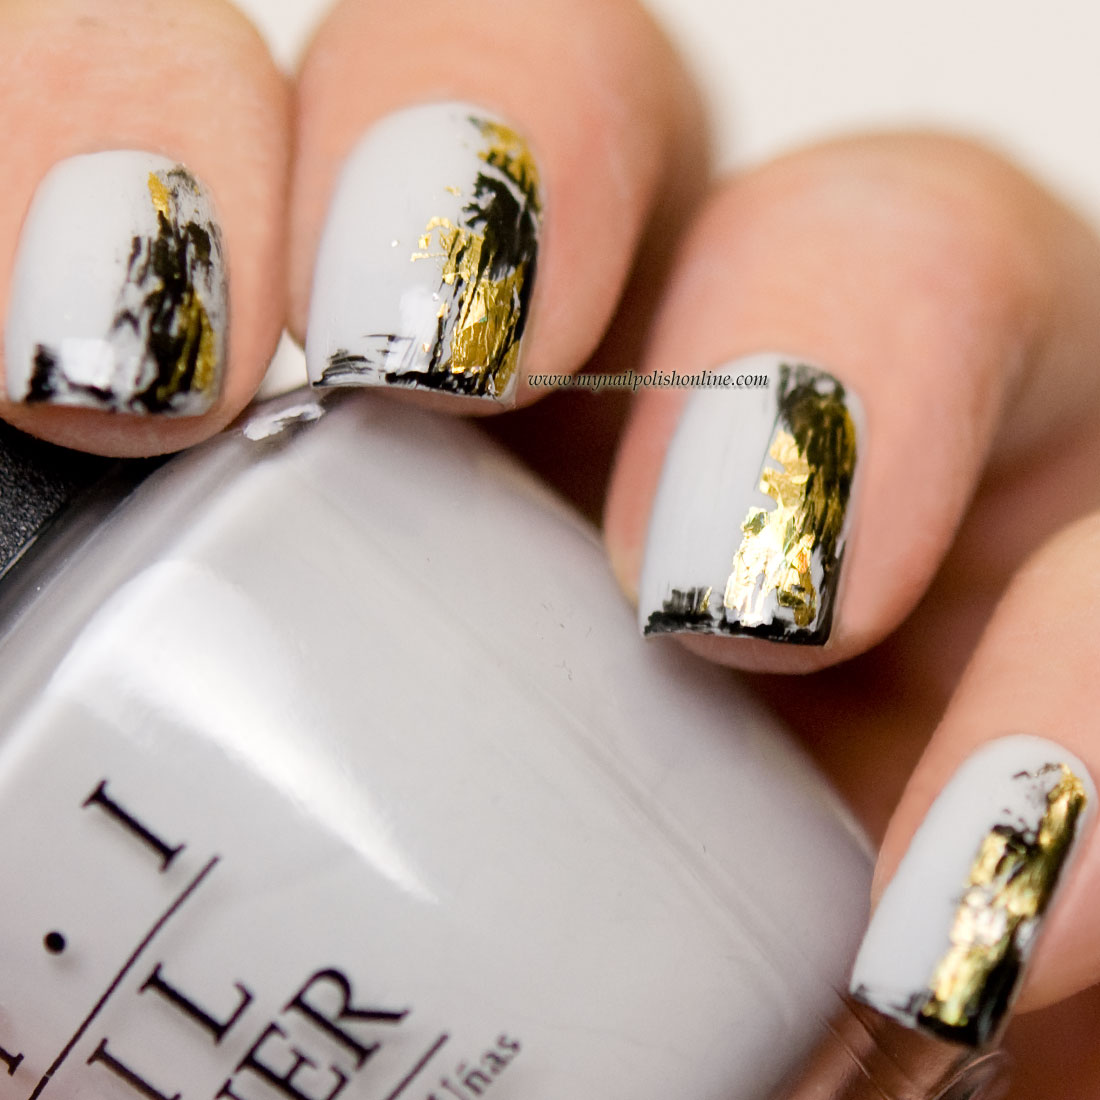 Nail Art - Experimenting with foil - My Nail Polish Online